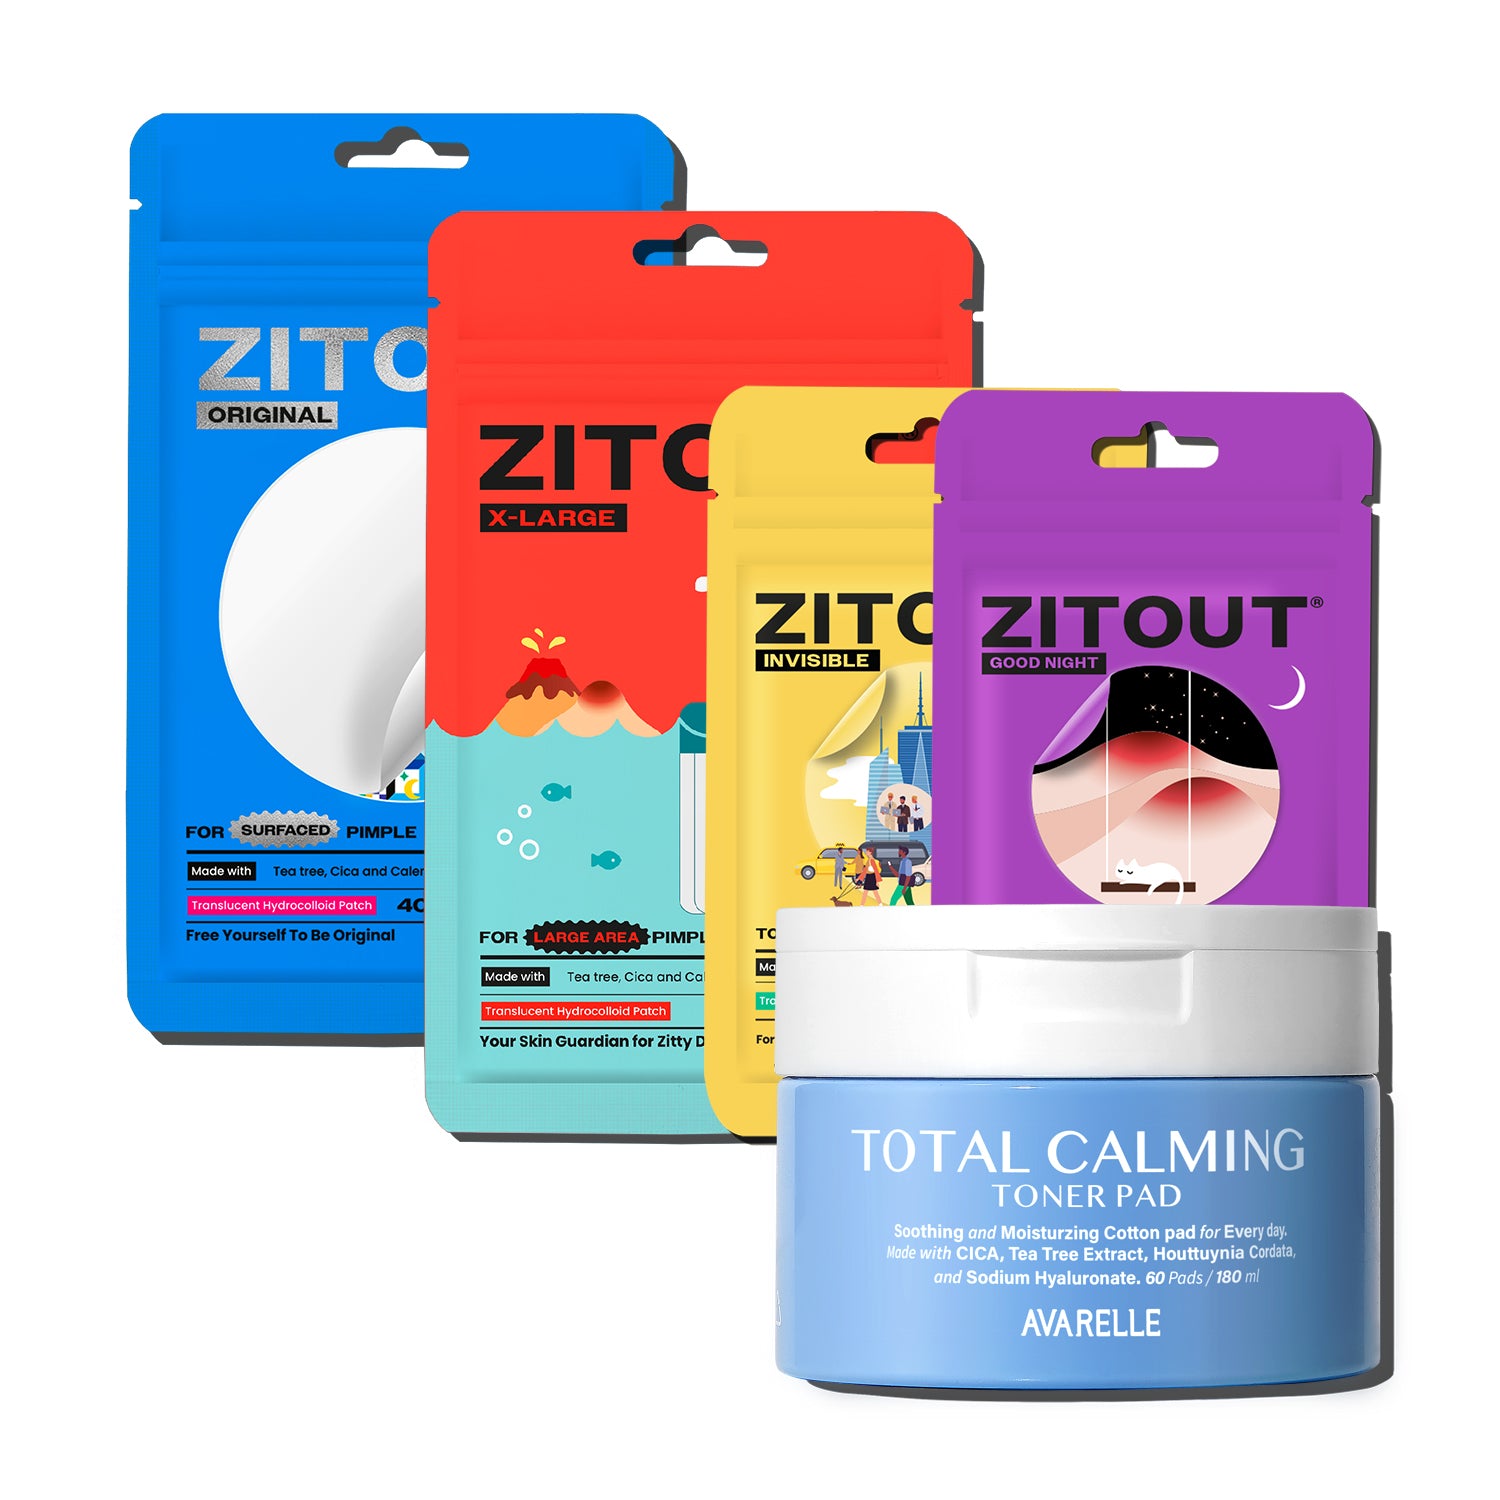 five Avarelle product on a white background.  These include ZitOut Original 40, ZitOut X-Large, ZitOut Invisible, ZitOut Good Night, and Avarelle's Total Calming Toner Pad